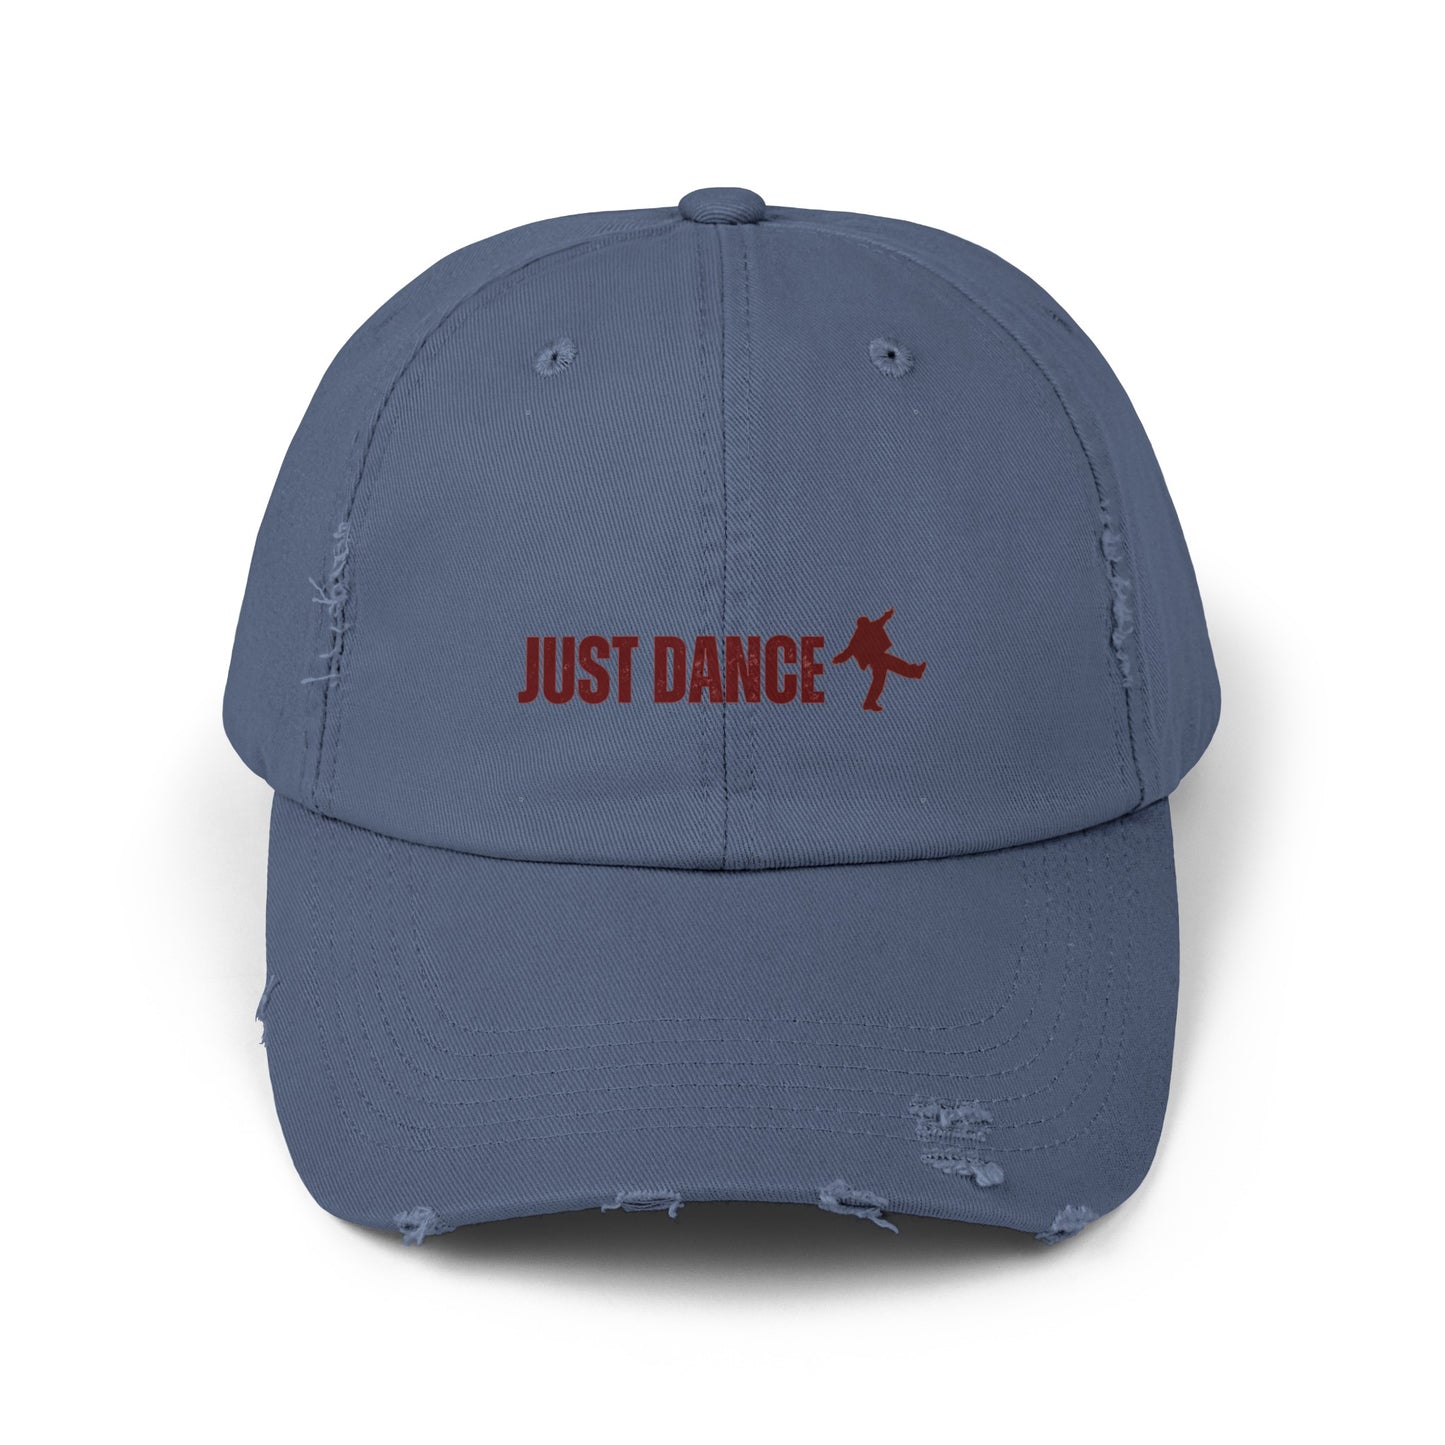 j-hope Inspired Hope On The Street "Just Dance" Unisex Distressed Cap